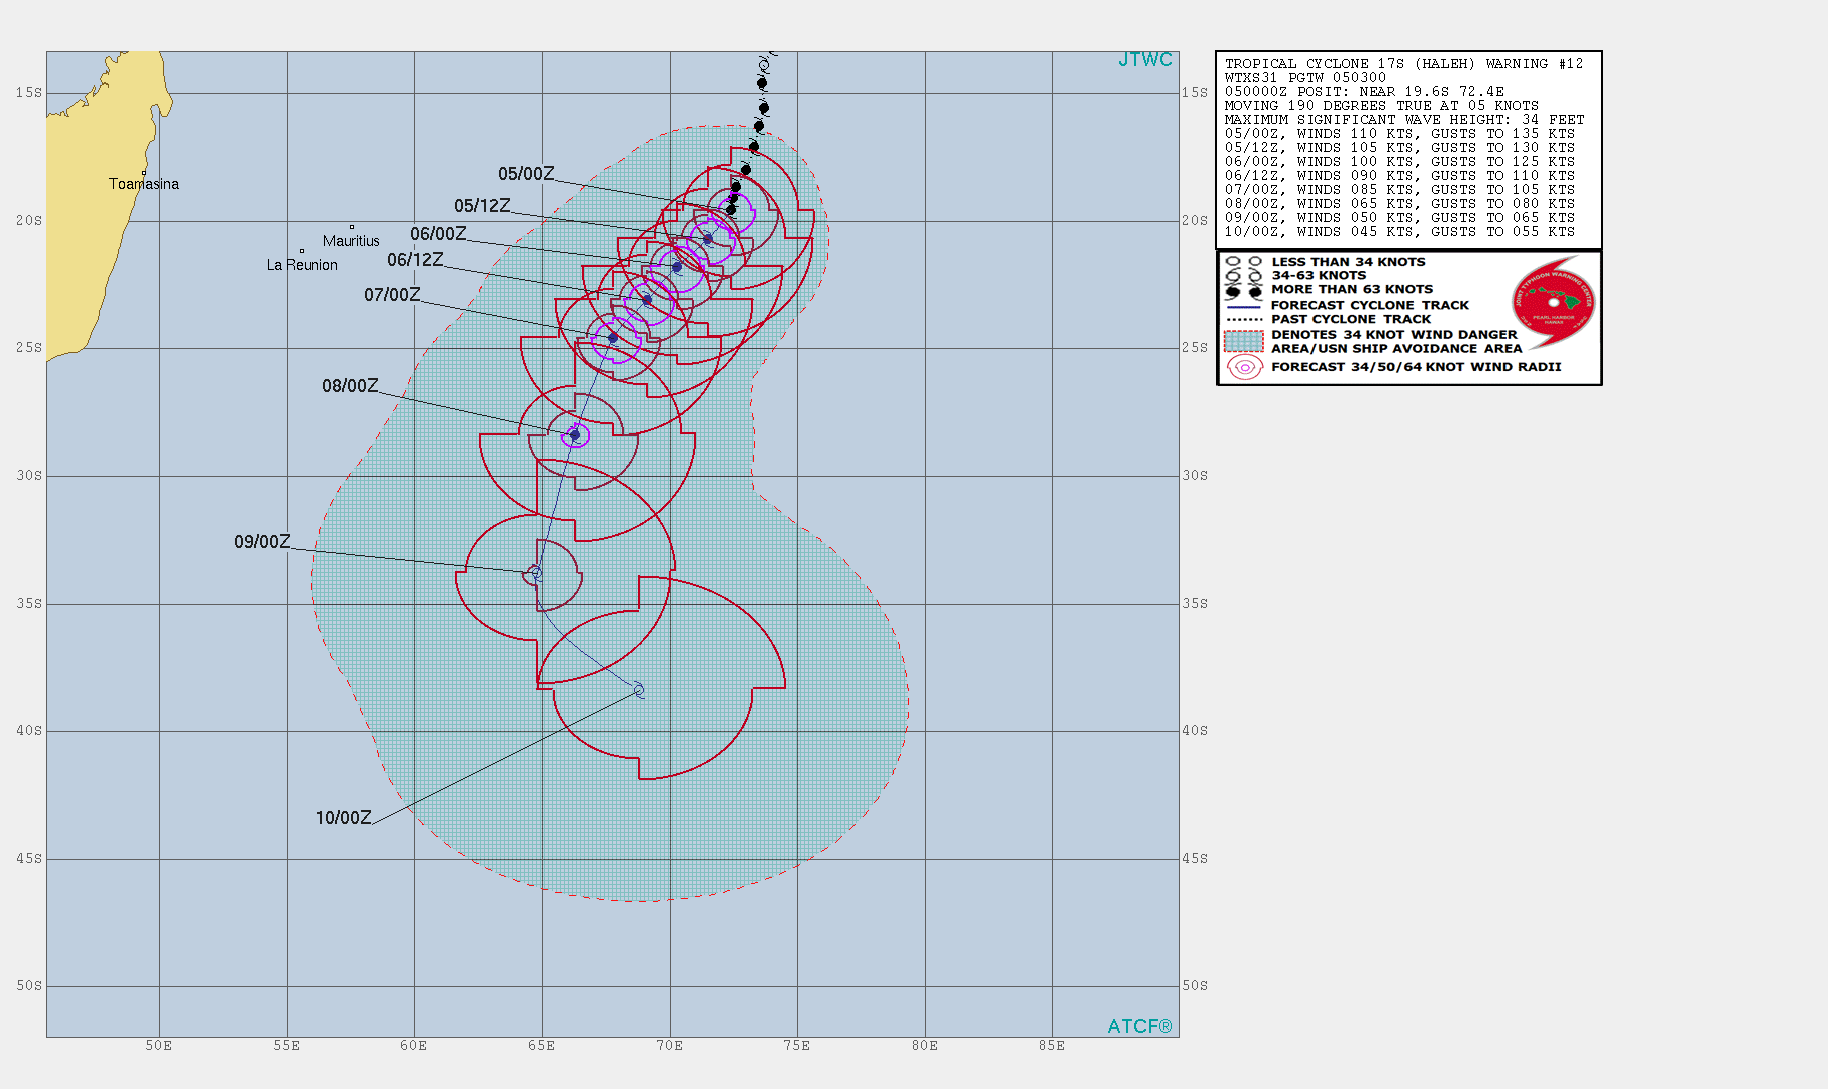 03UTC: TC HALEH(17S) has peaked, now a top category 3 US, forecast to weaken more rapidly after 24hours